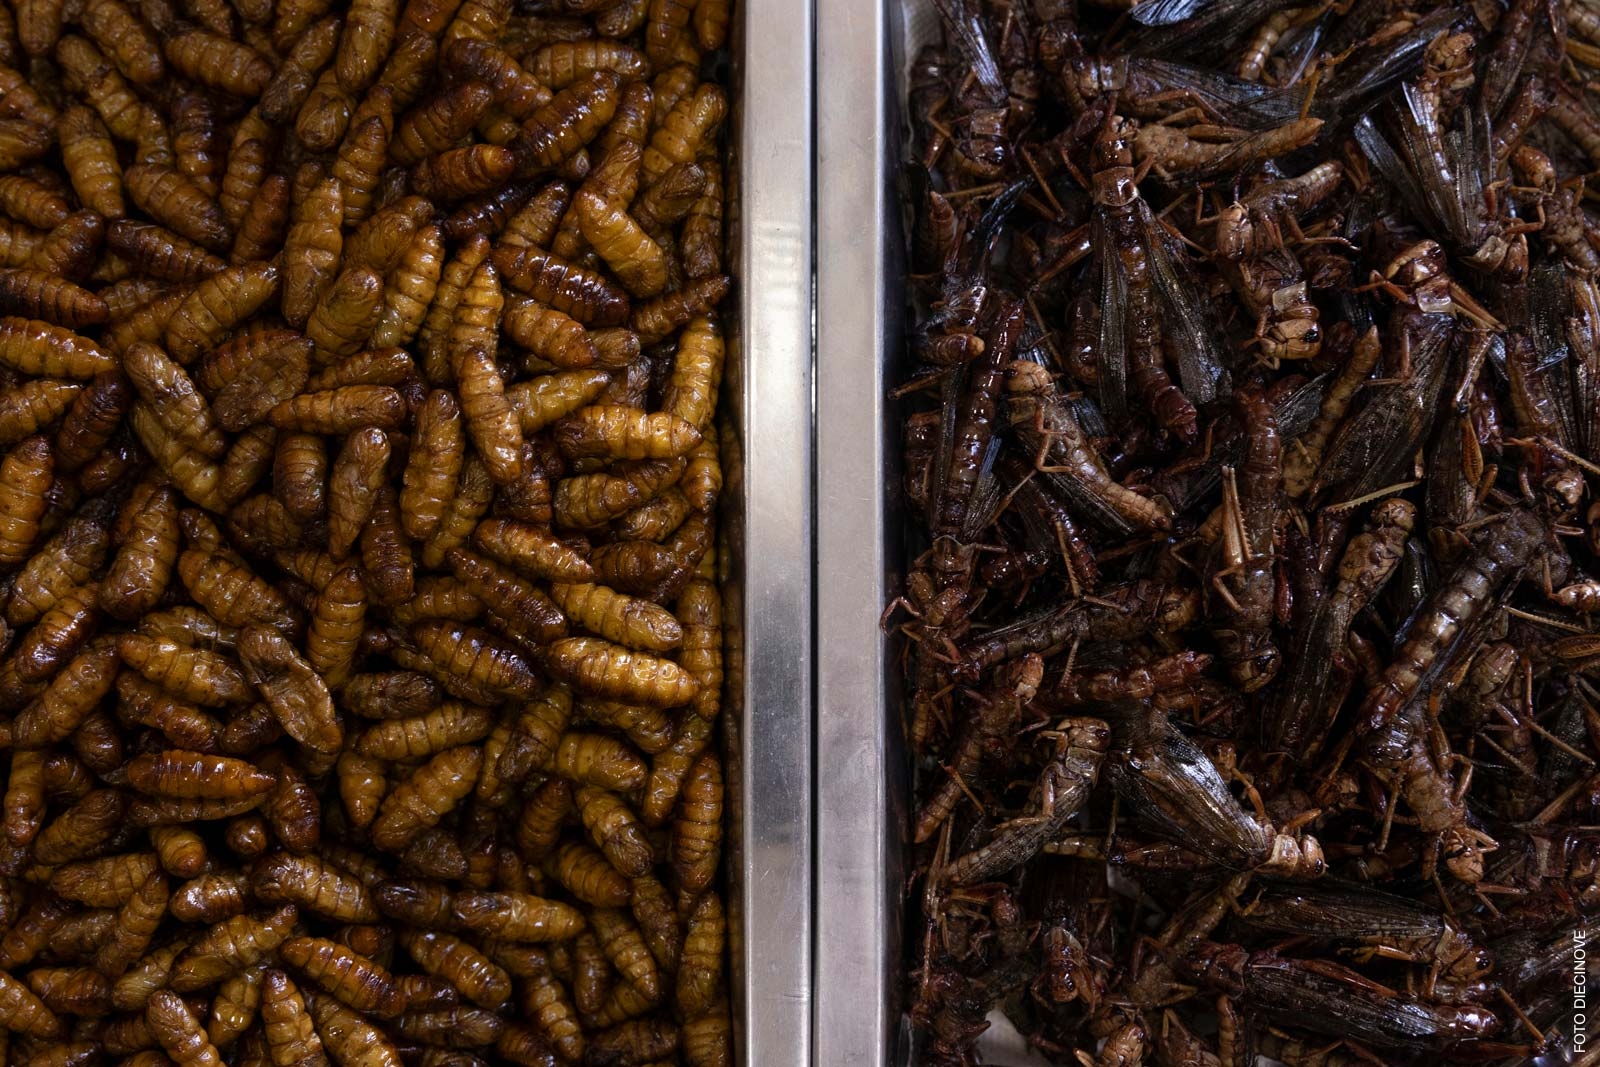 meal worms and crickets